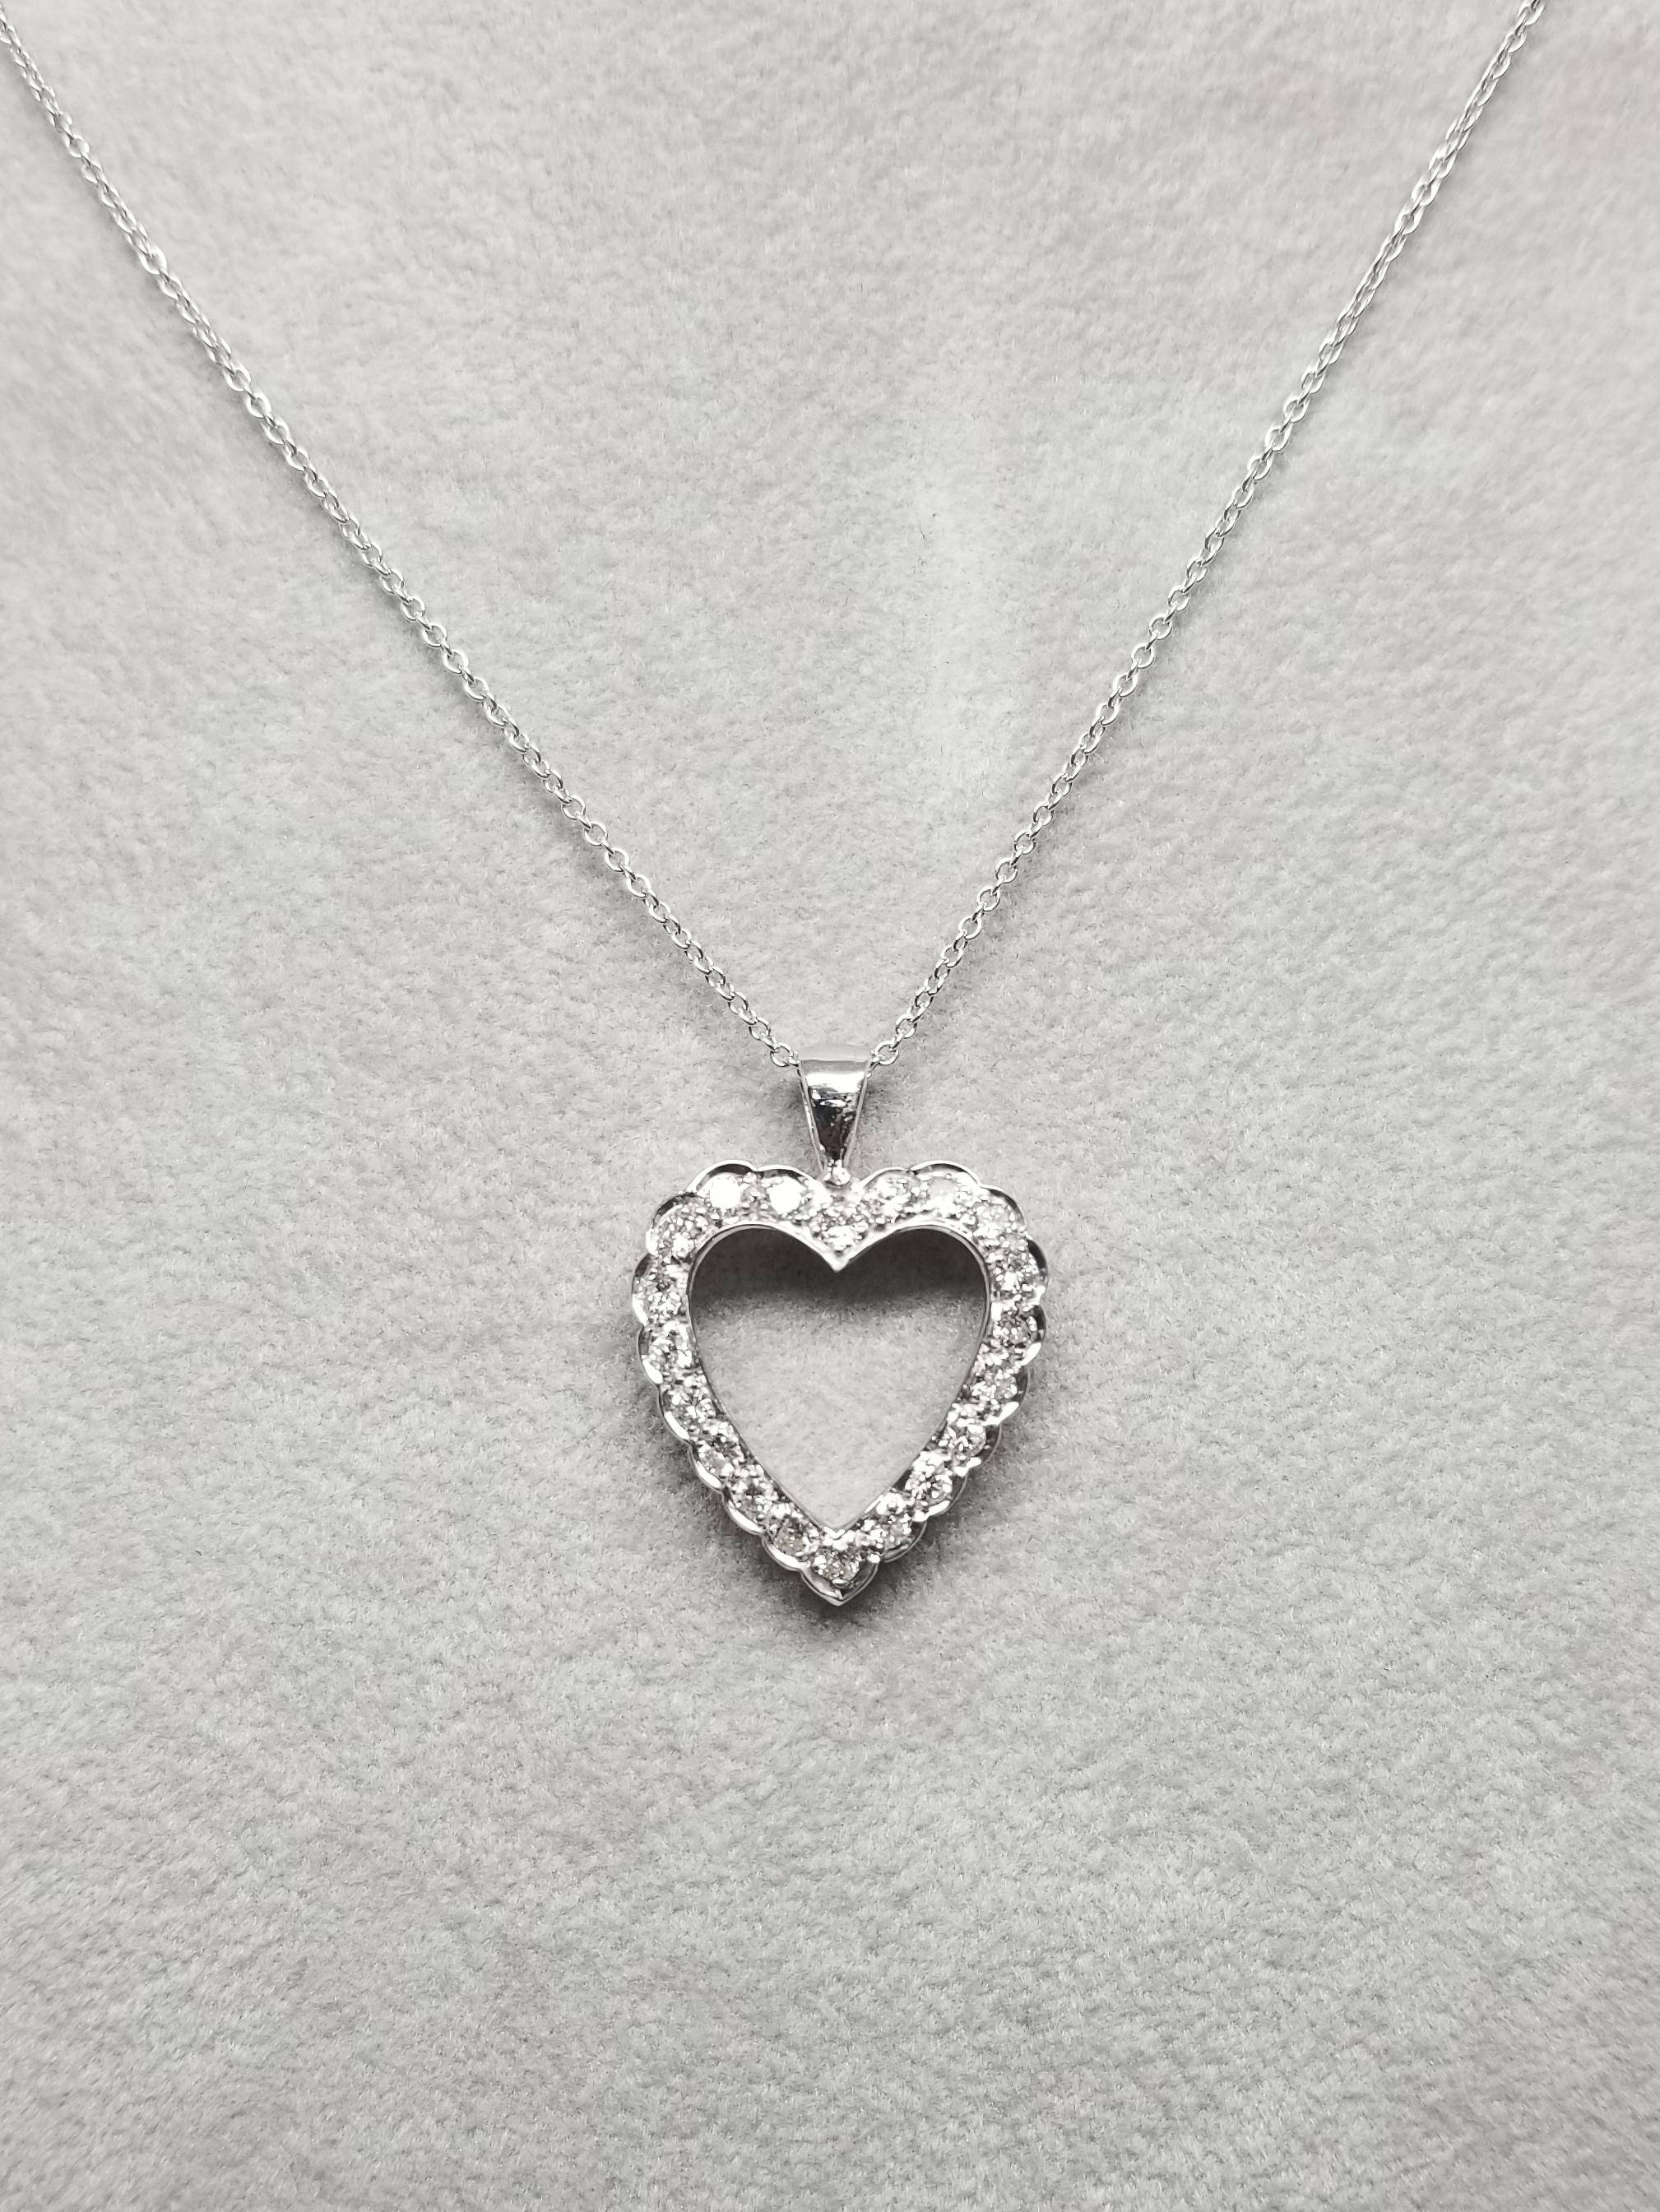 14k white gold vintage Art Deco Style diamond heart pendant, containing 20 round full cut diamonds of very fine quality weighing 1.00cts. on 16 inch chain.